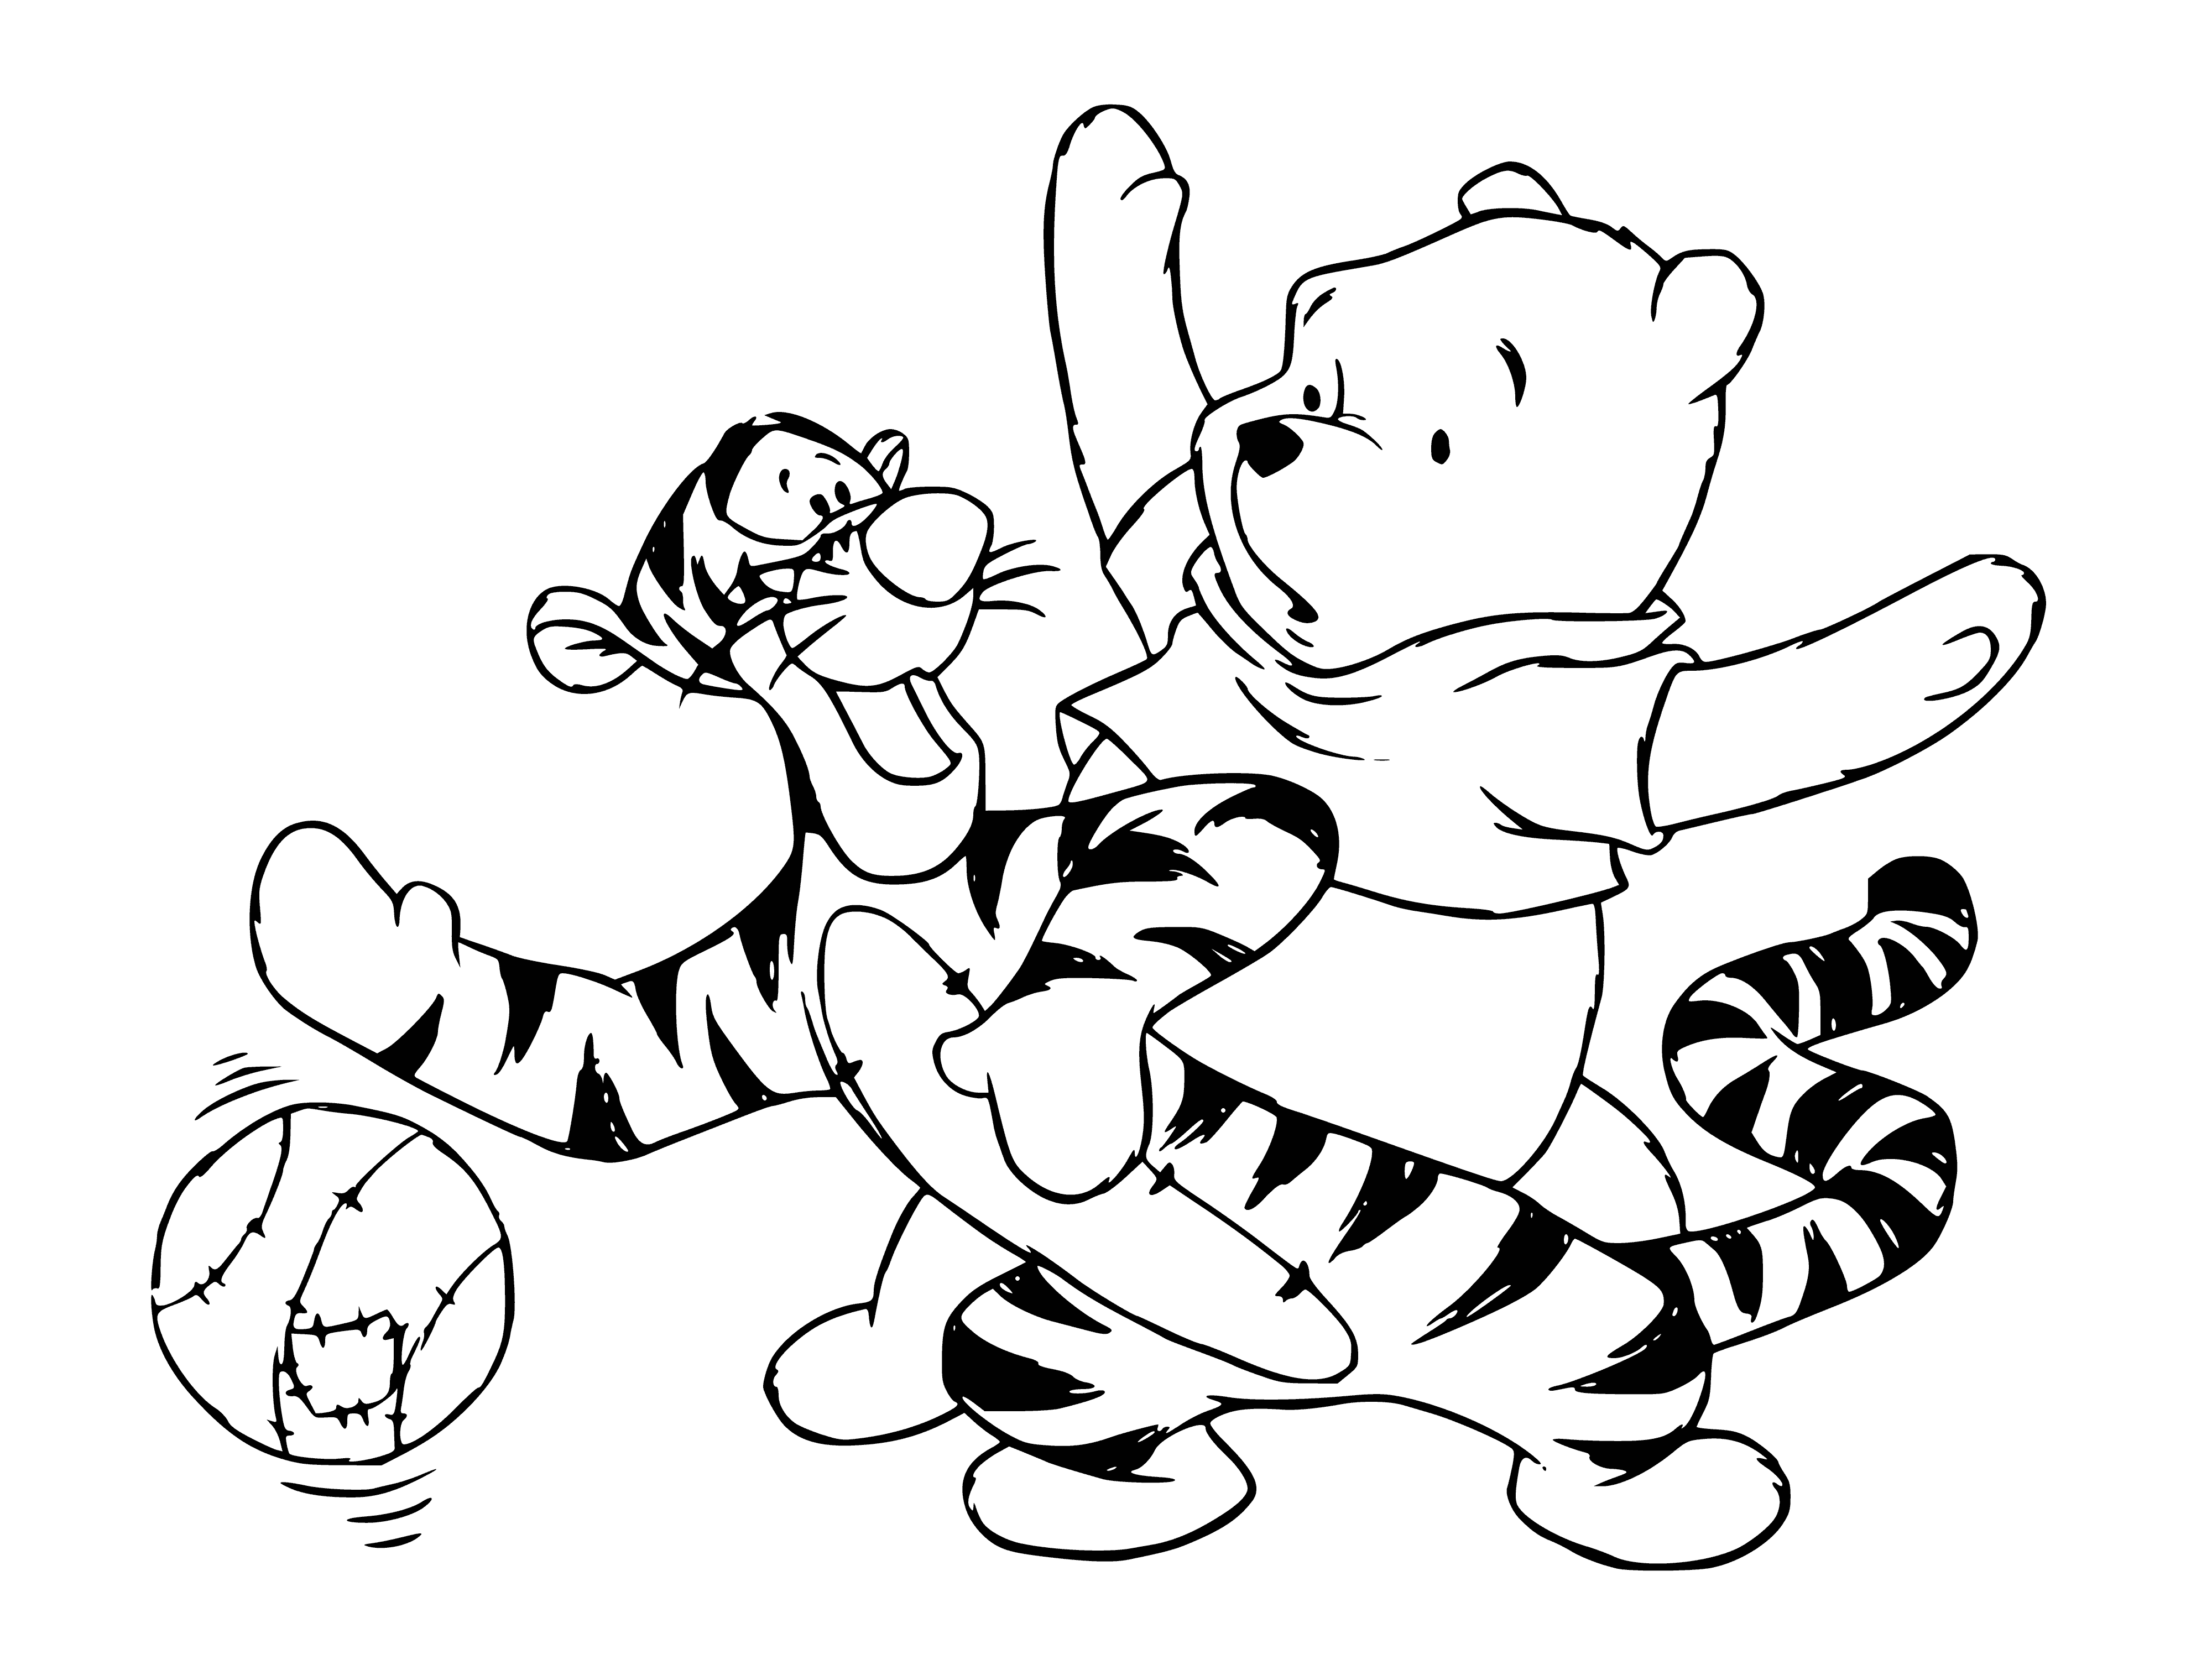 Tigger and teddy bear coloring page